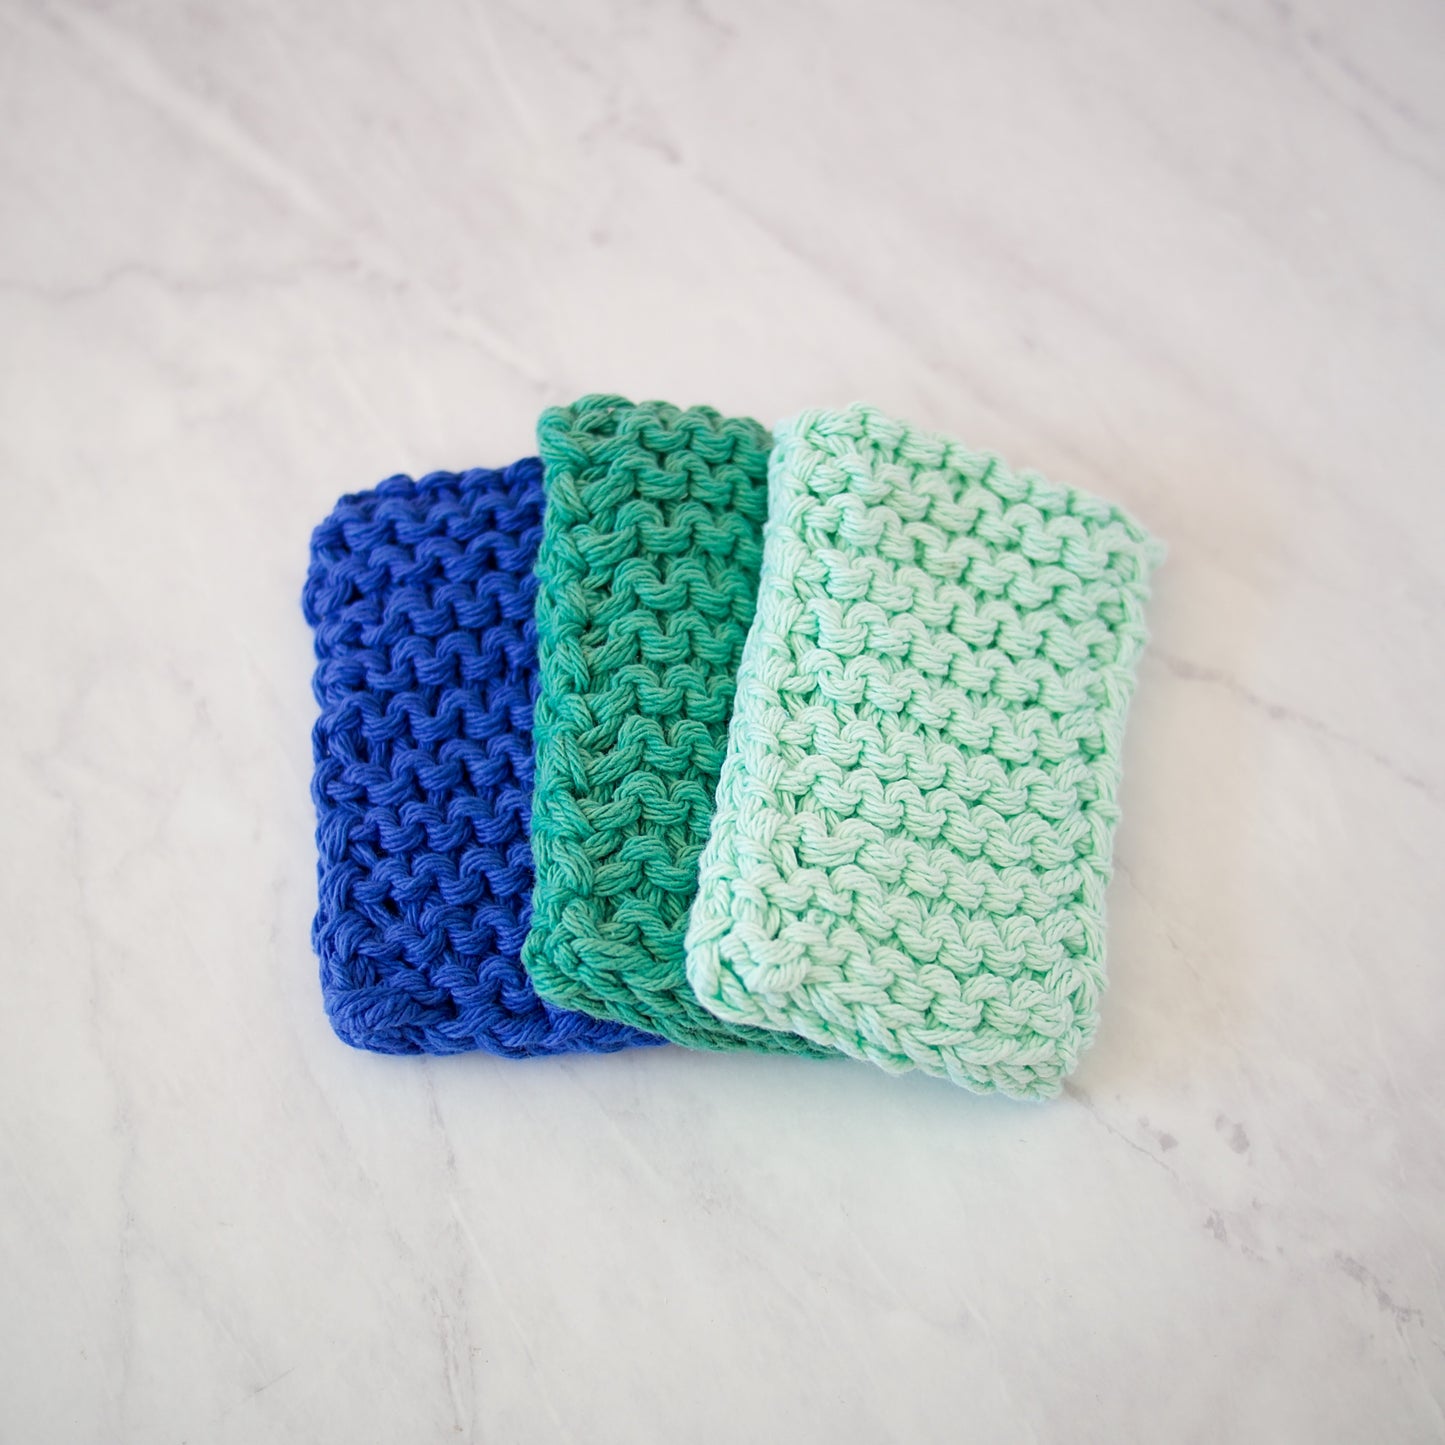 Set of 3 Forever Sponges in Cool Shades